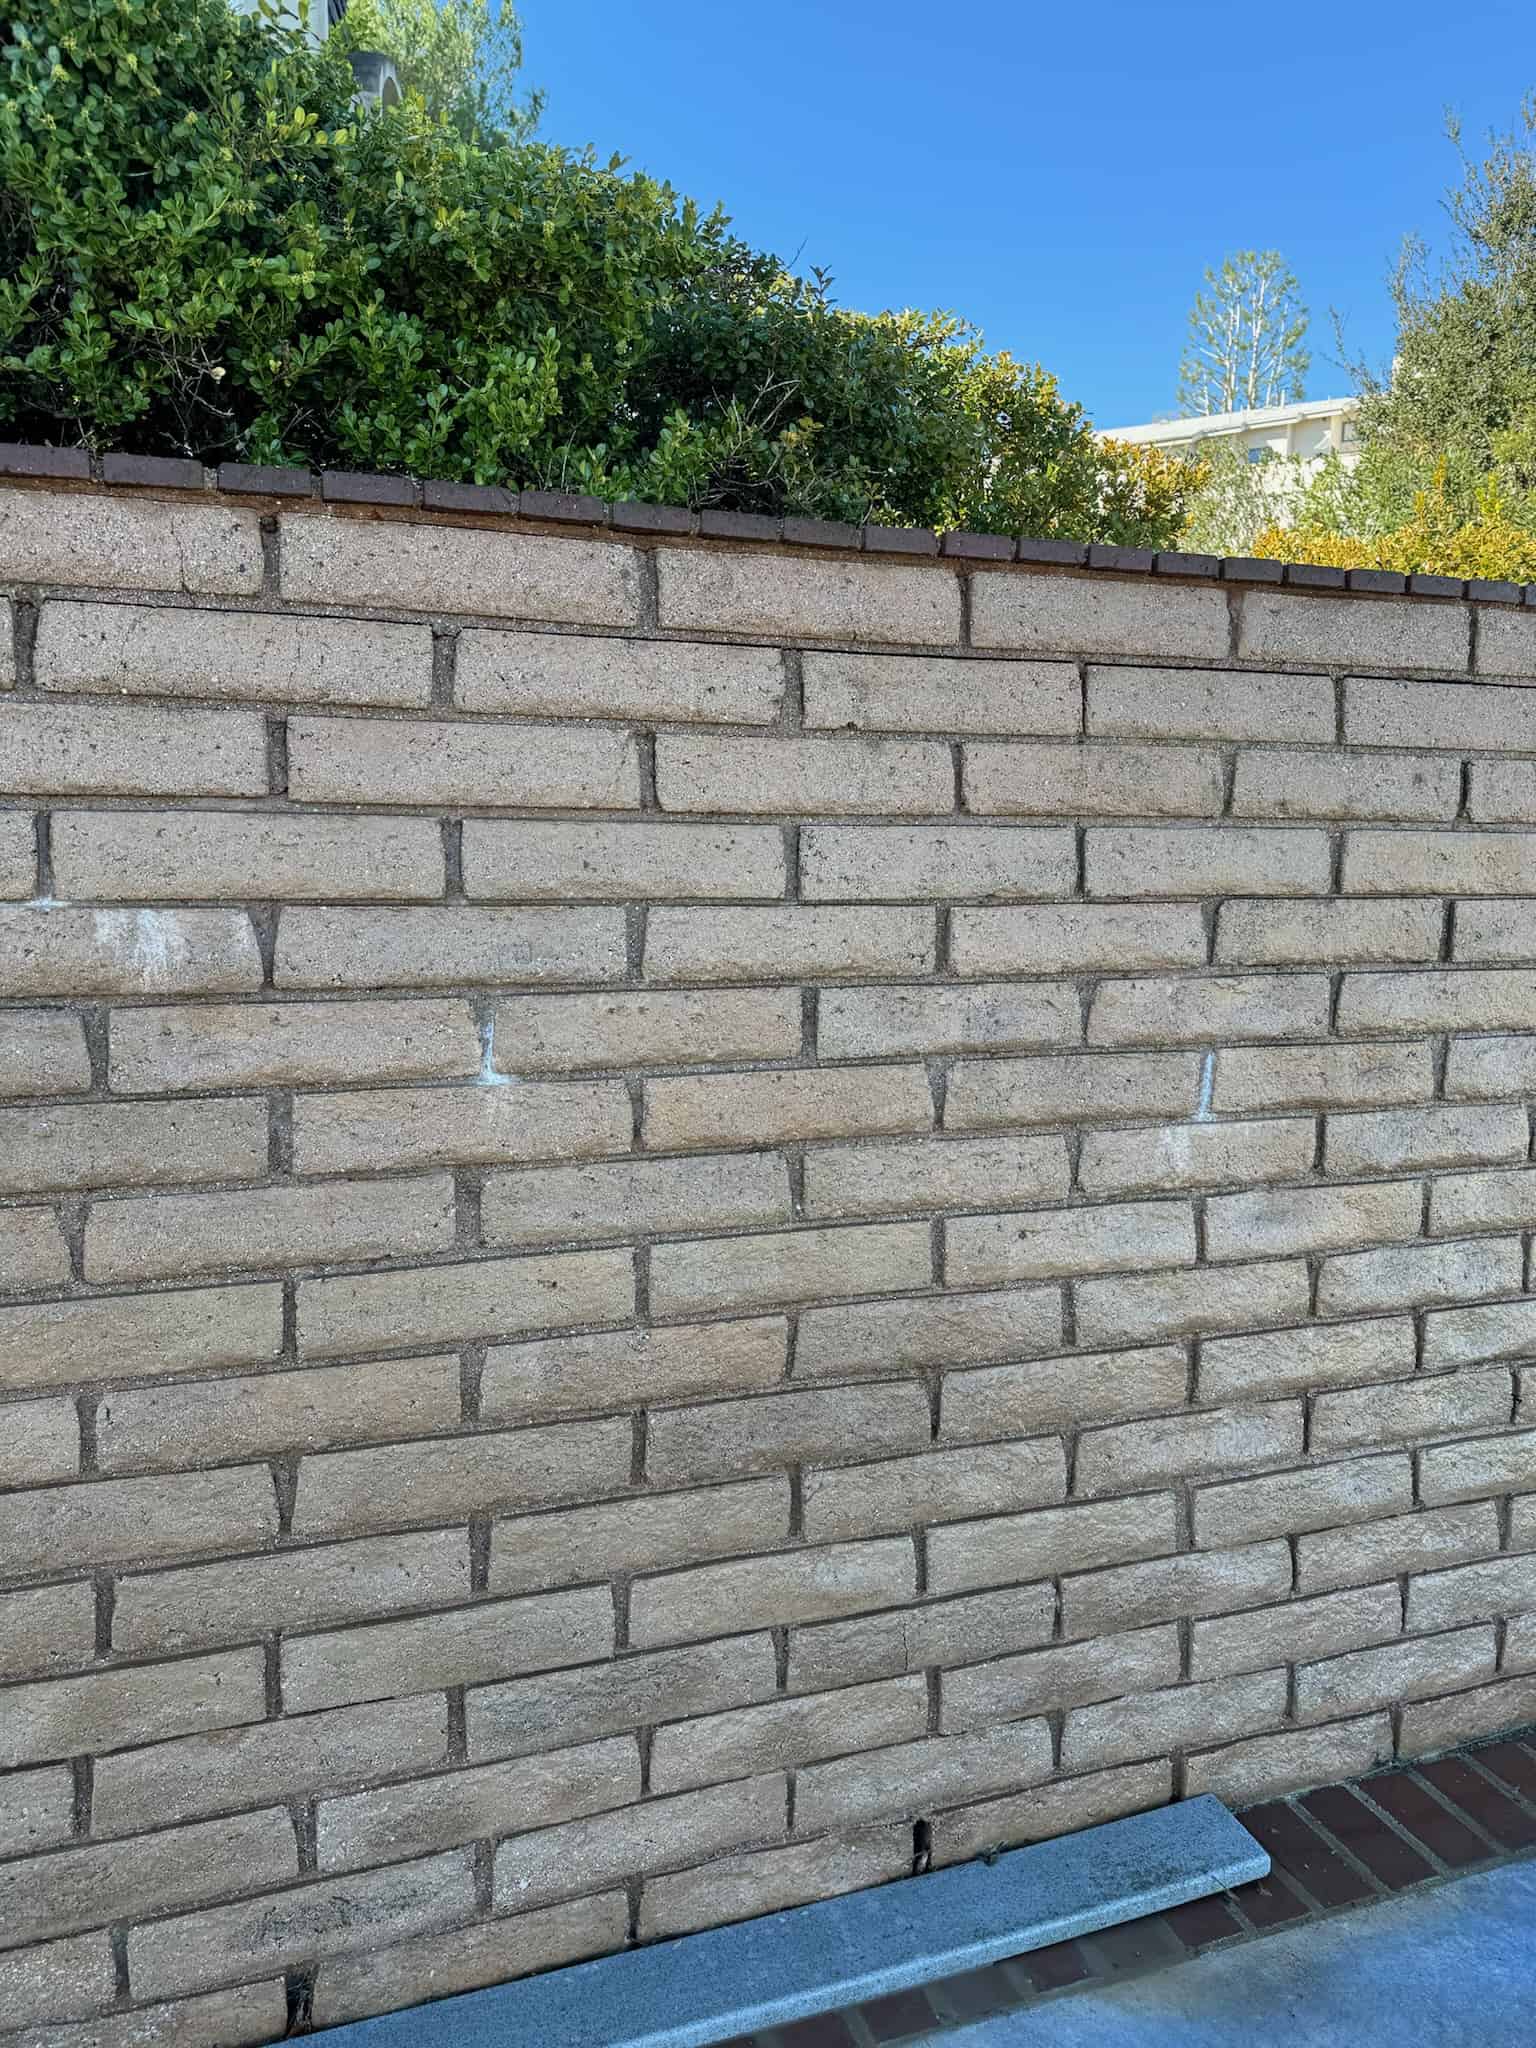 after photo of brick wall after it was power cleaned